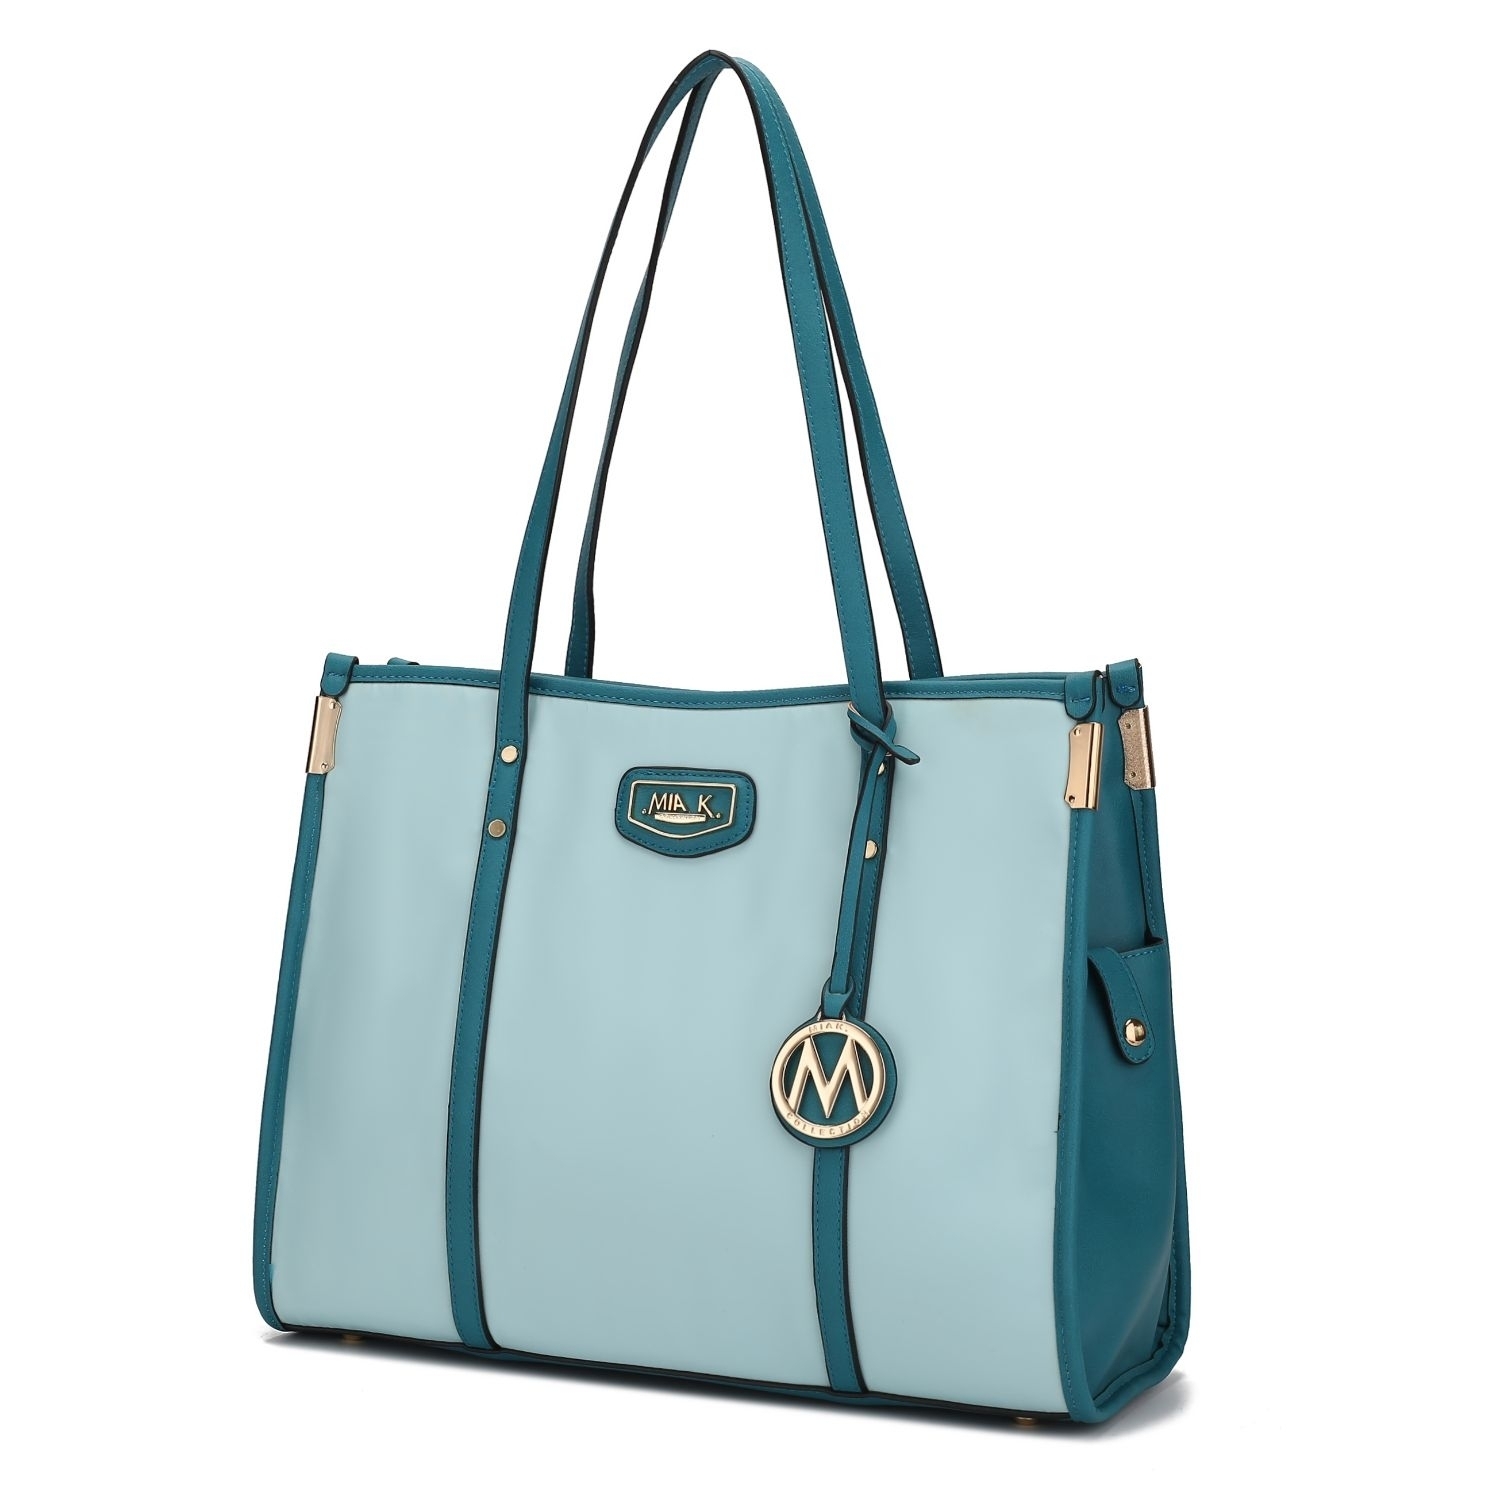 MKF Collection Kindred Oversize Tote Handbag By Mia K. - Seafoam Turquoise